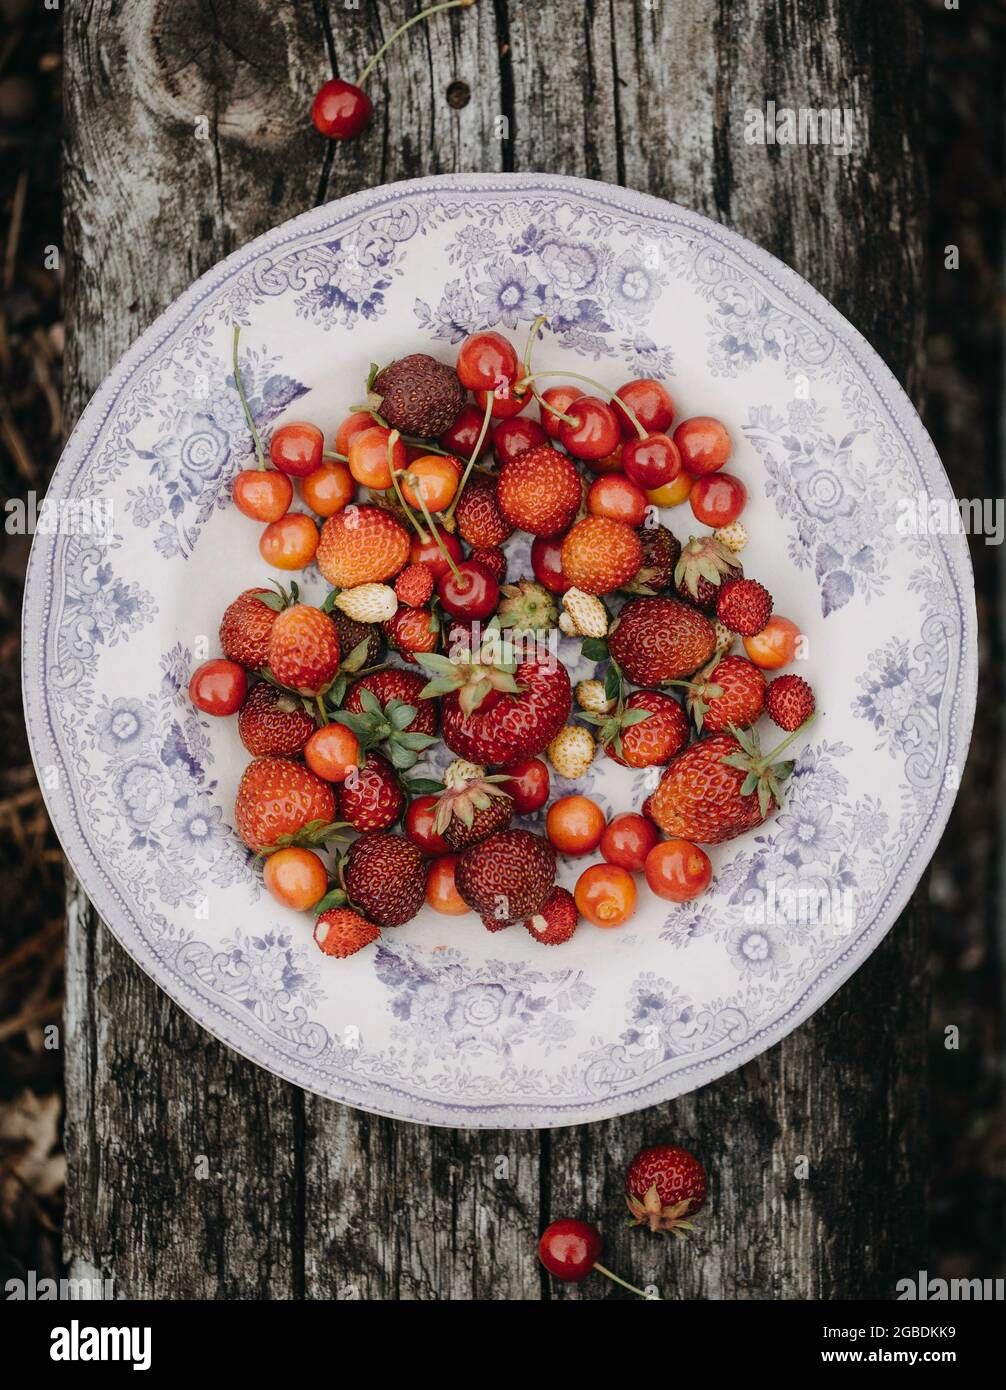 A plate of fresh berries Stock Photo